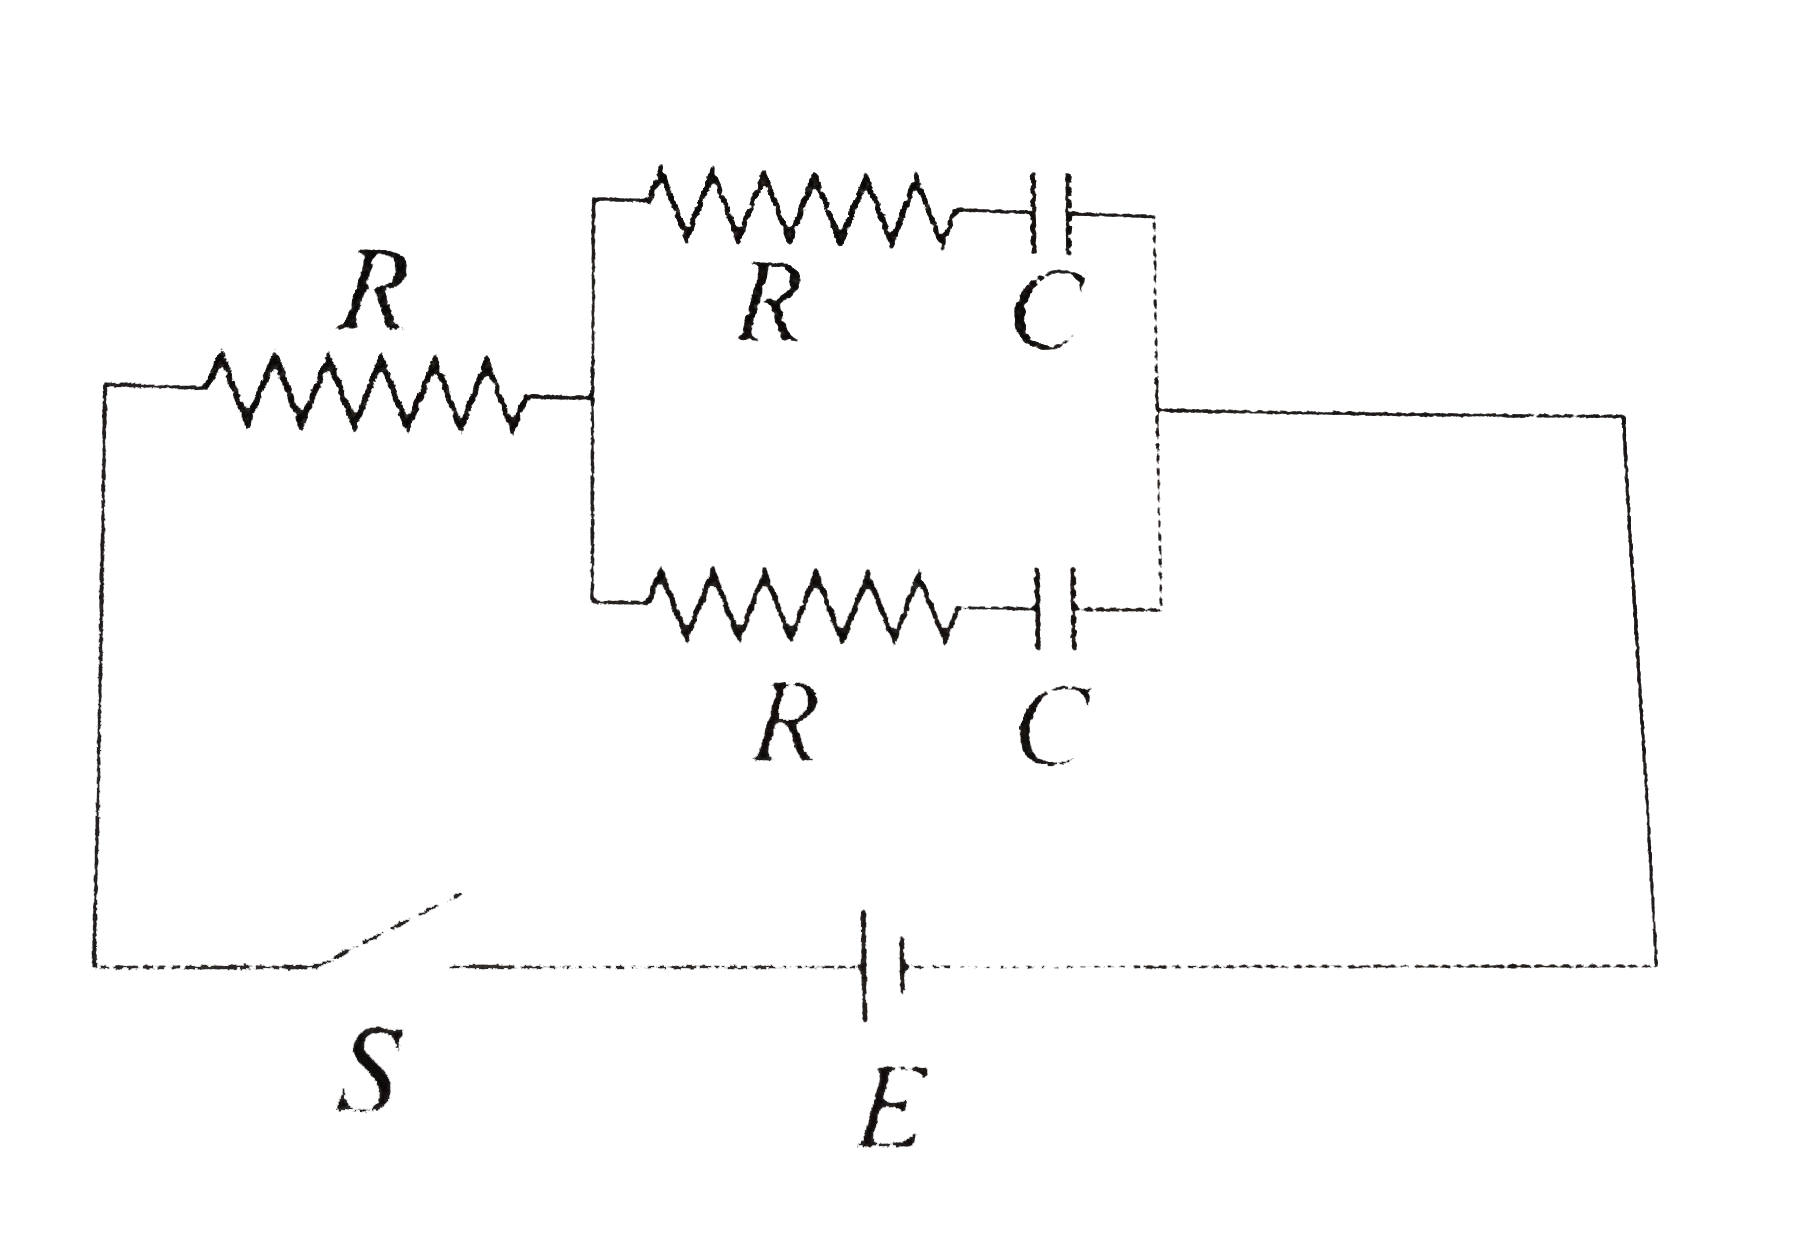 The switch S in the circuit diagram is closed at t = 0. The charge on capacitors at any time is